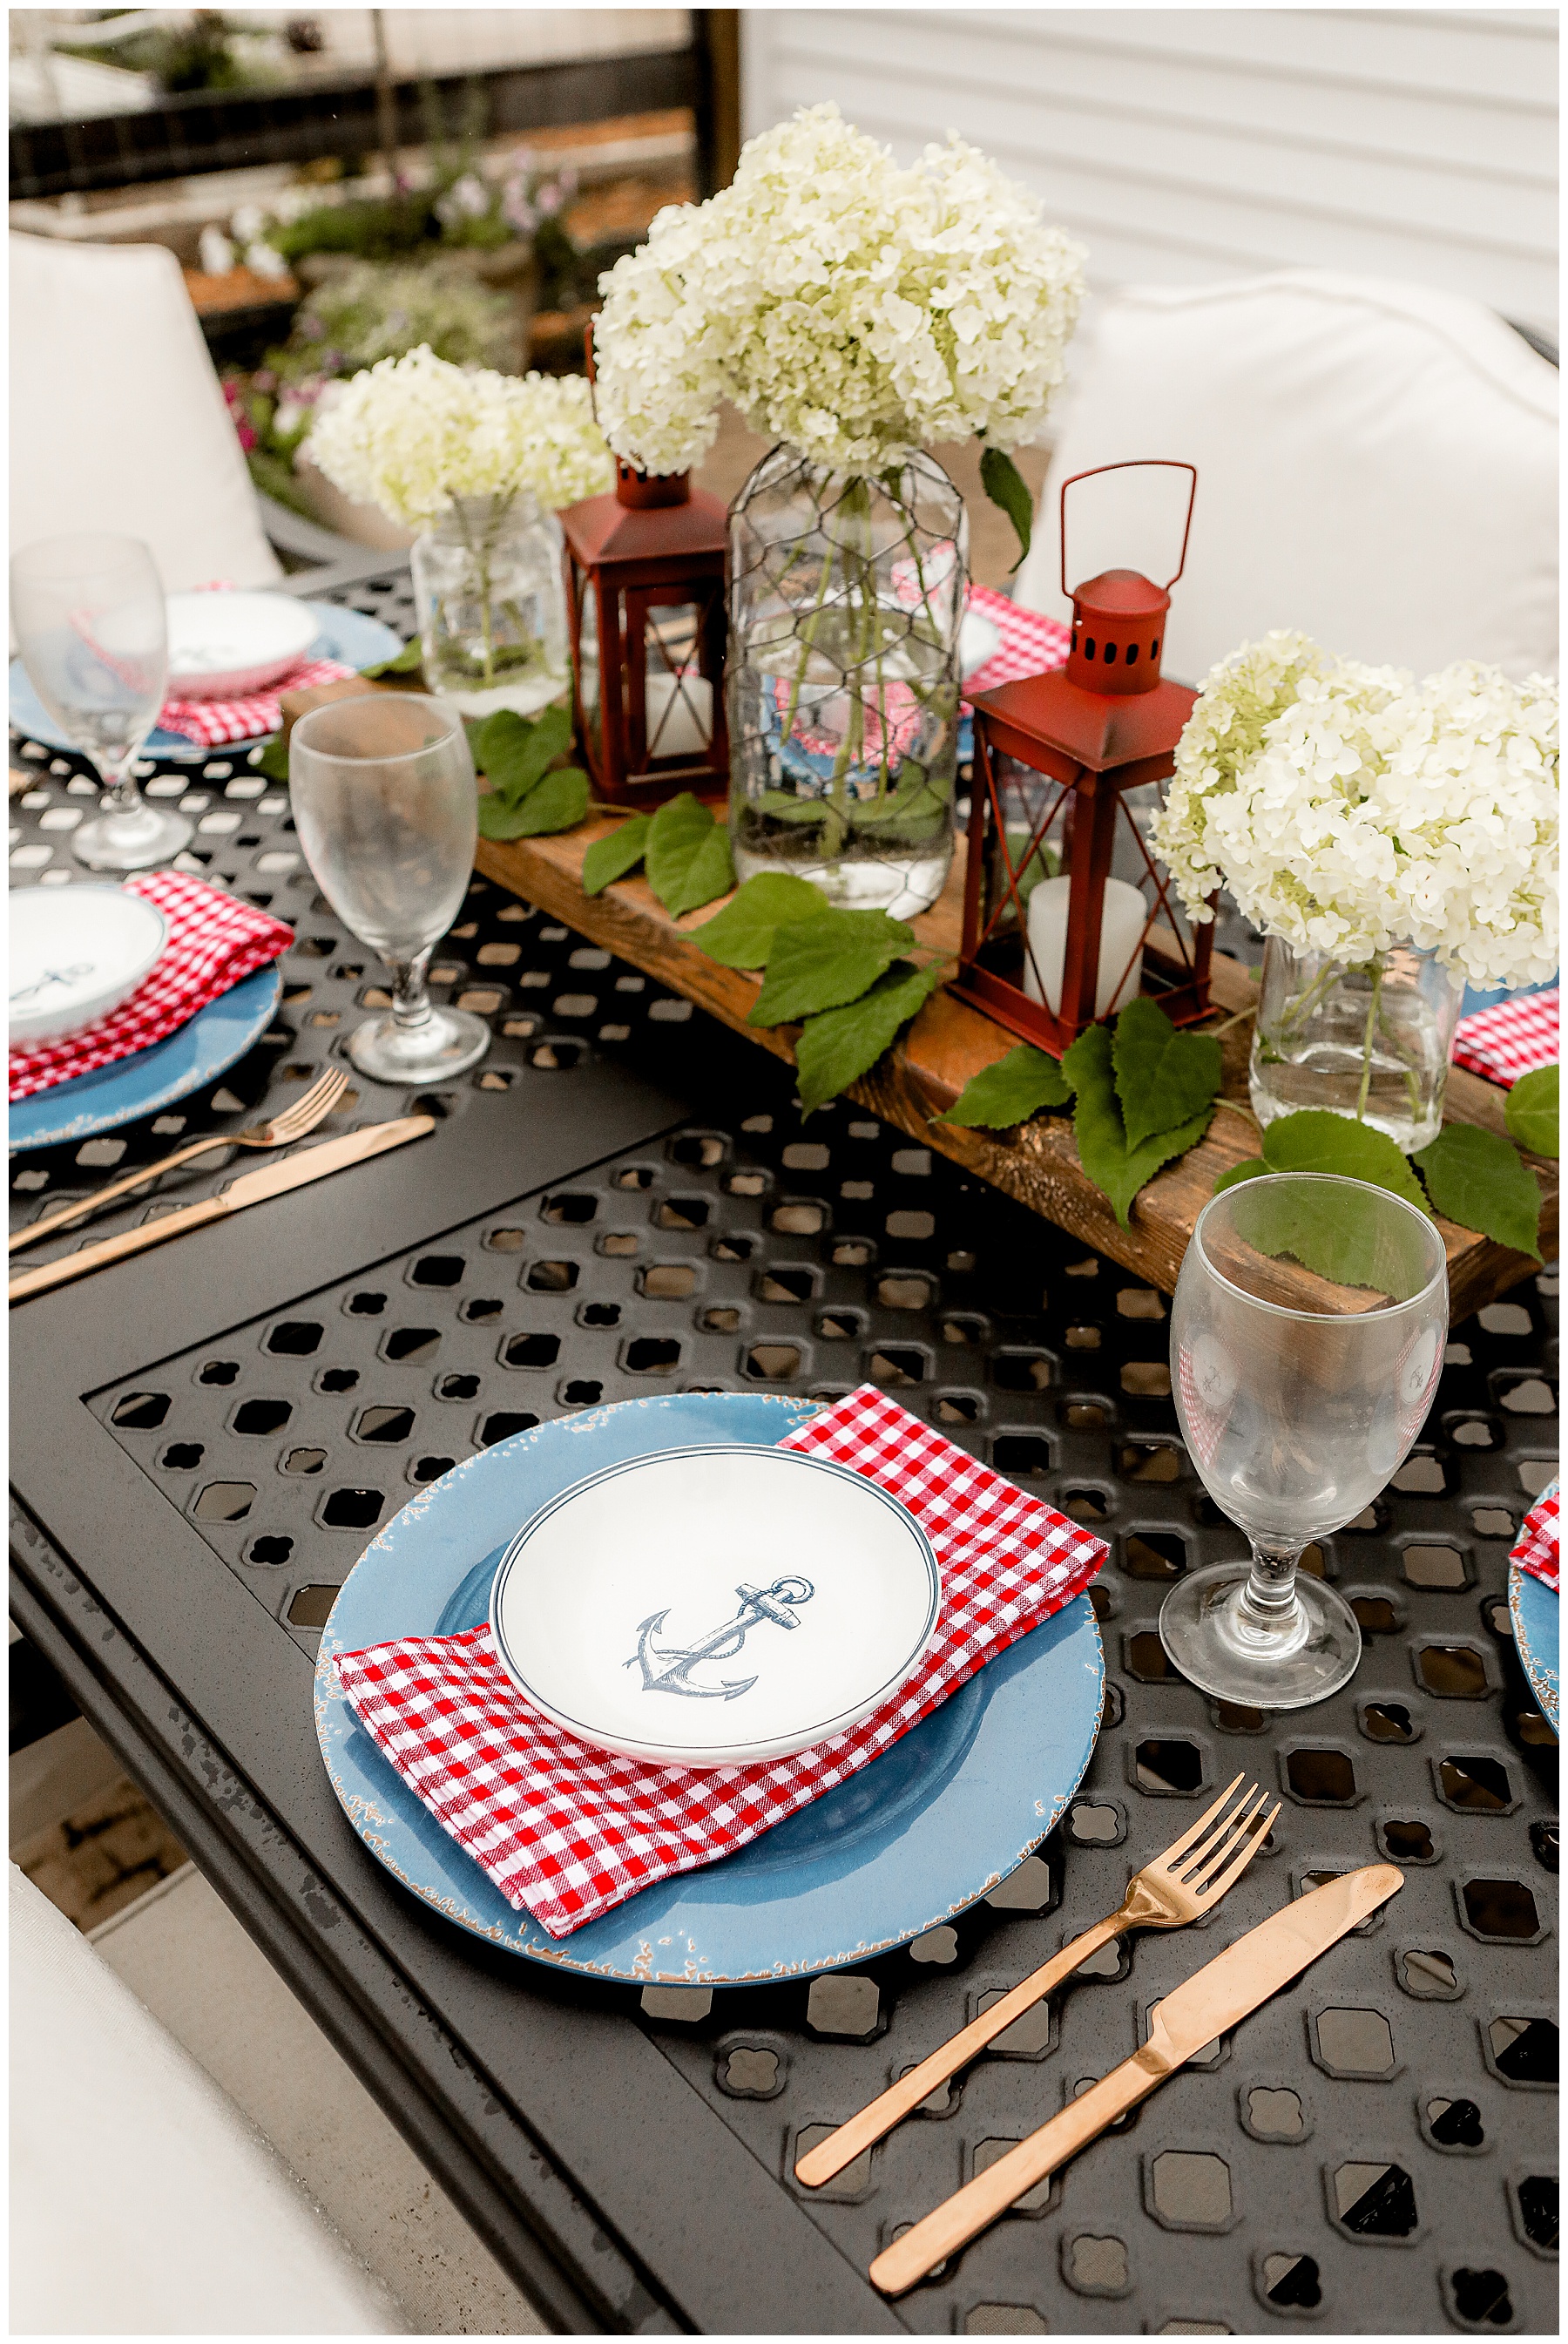 outdoor place setting